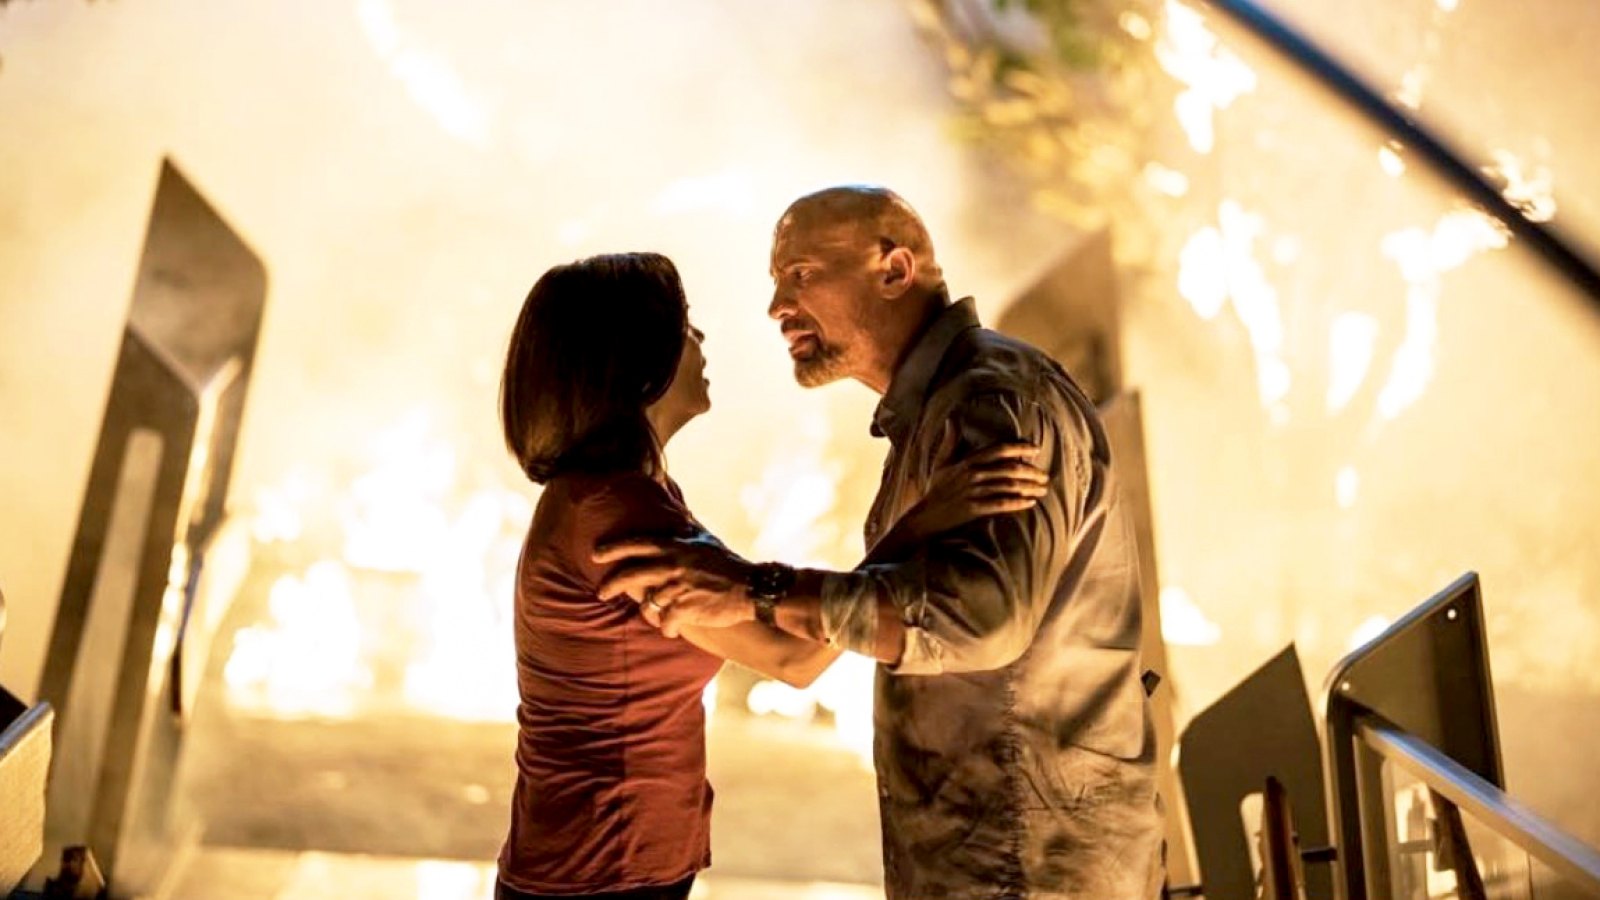 Neve Campbell and Dwayne Johnson in ‘Skyscraper‘